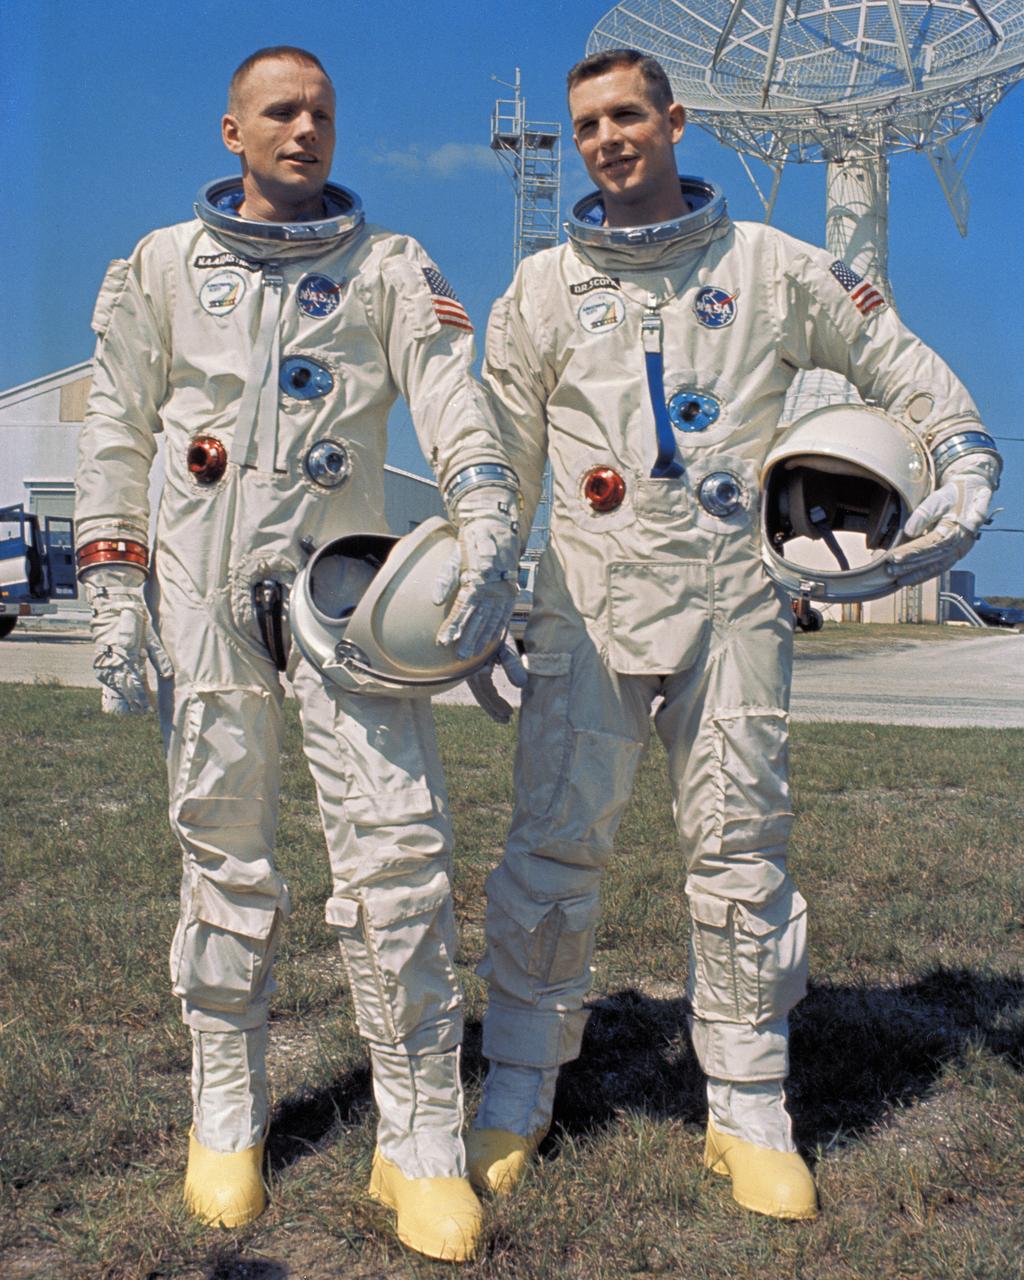 GEMINI 8 ARMSTRONG & SCOTT MISSION RECOVERY 8x10 SILVER HALIDE PHOTO PRINT 